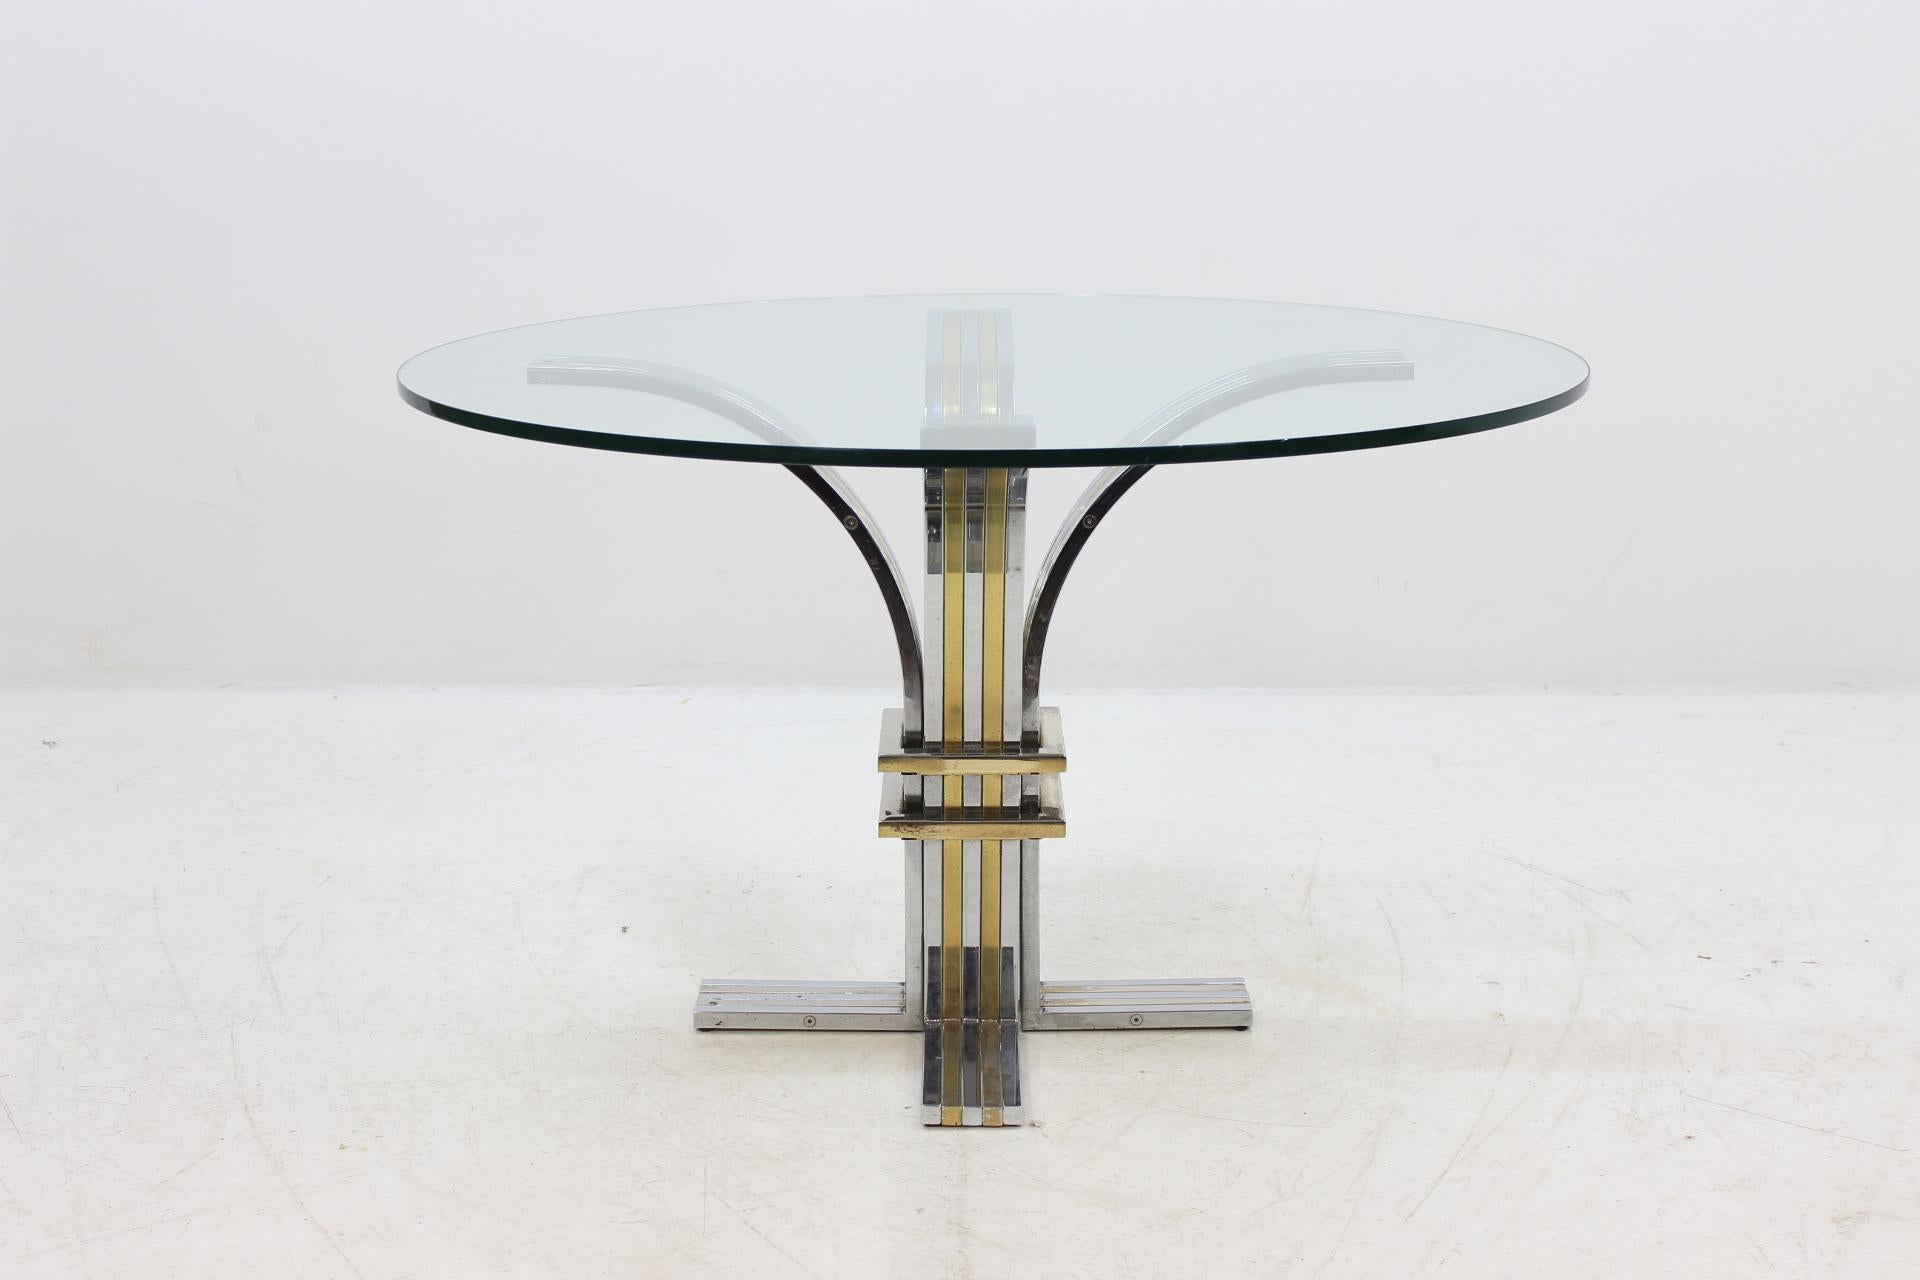 Very nice sculptural dining table made by Banci and Firenze, Italy, 1970. This table base was made of square tubular bent pipes in chrome and brass, fixed together with a large glass top on it. High quality table and very well made piece of Italian